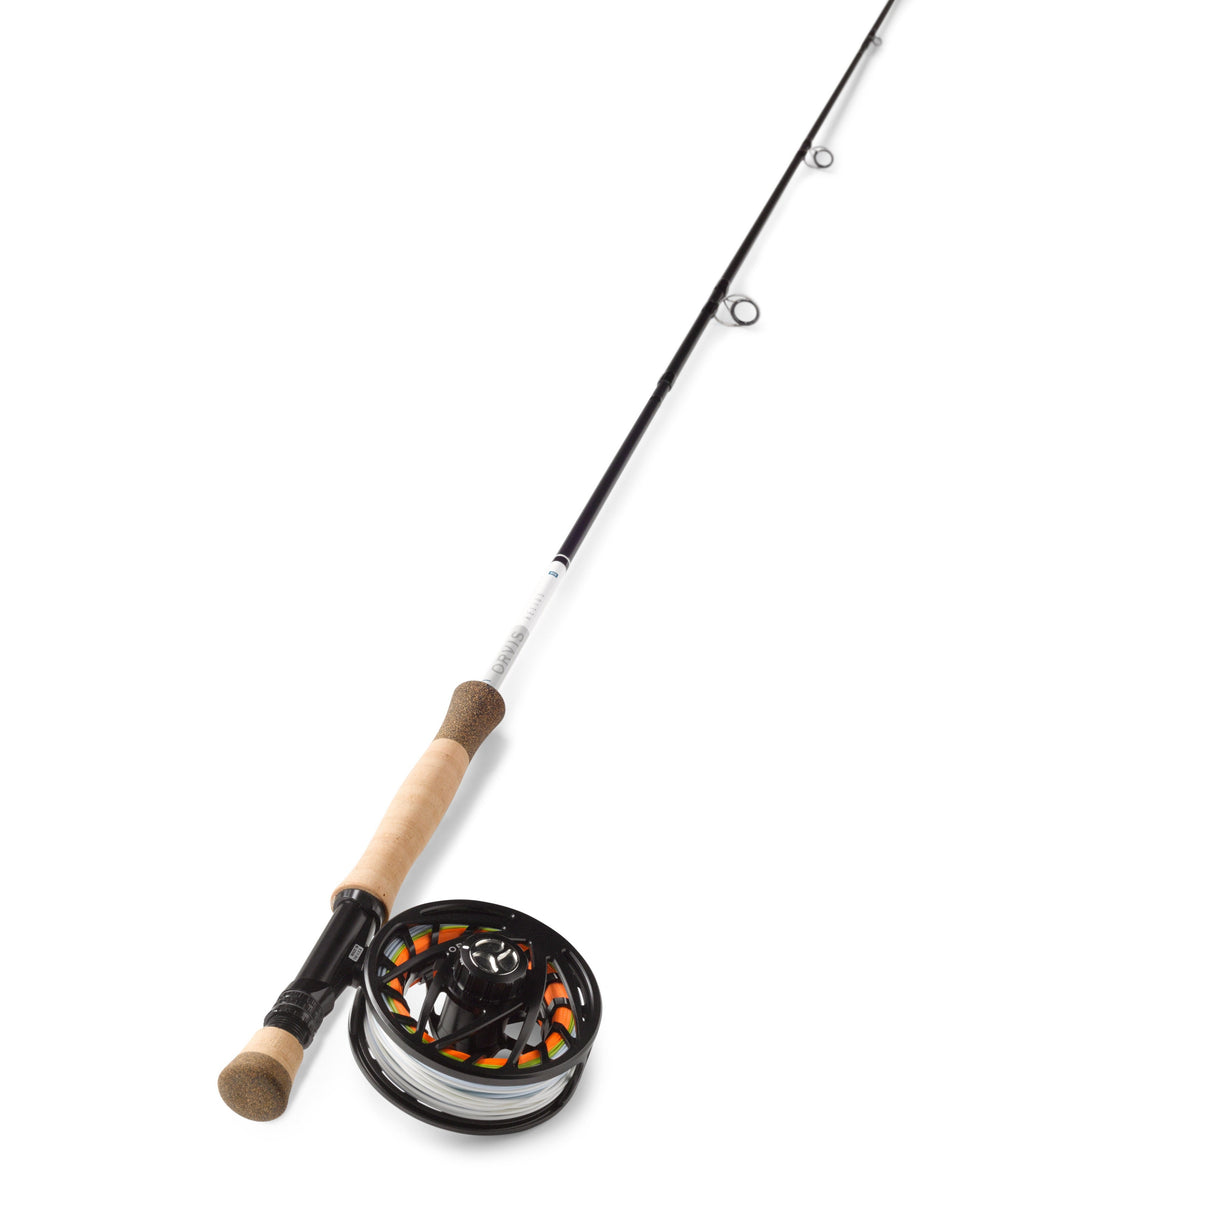 Orvis Clearwater 908-4 Rod Outfit 8-WT